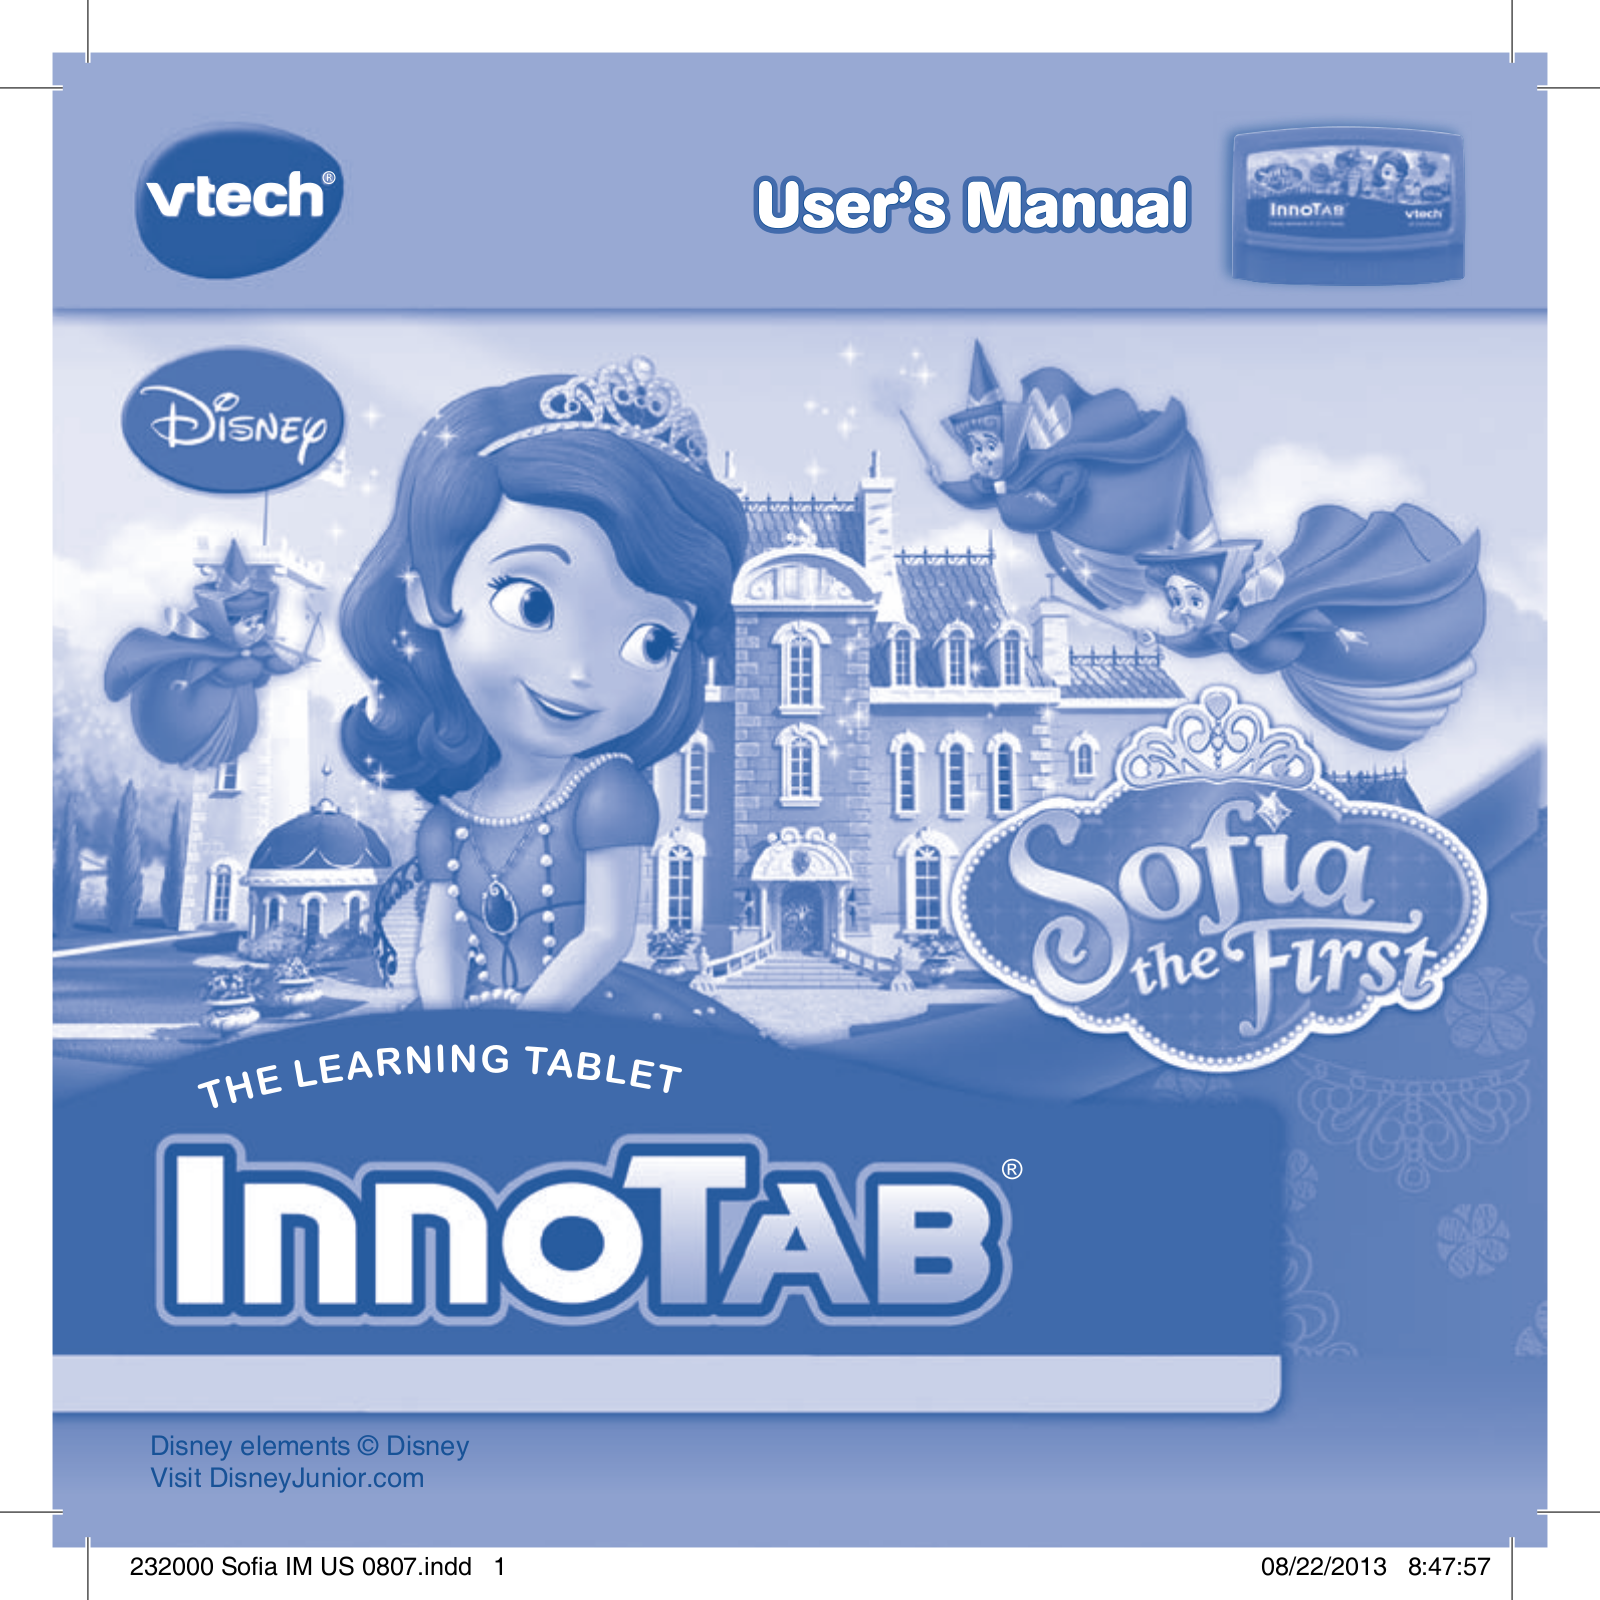 VTech Sofia the First Owner's Manual